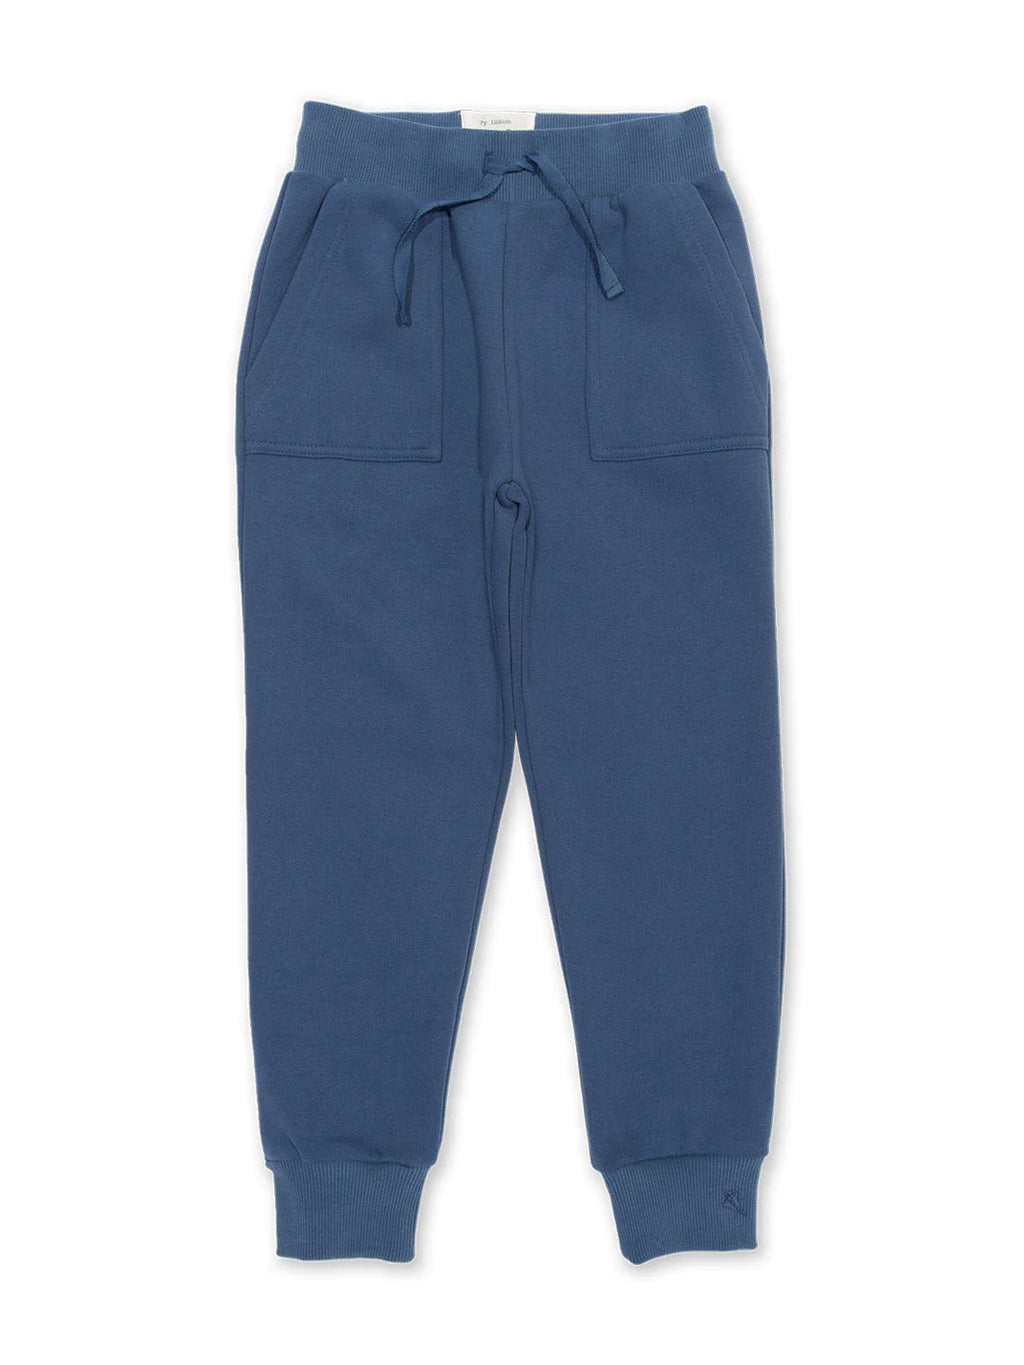 Kite Clothing Boys Navy Port & Starboard Joggers | SALE